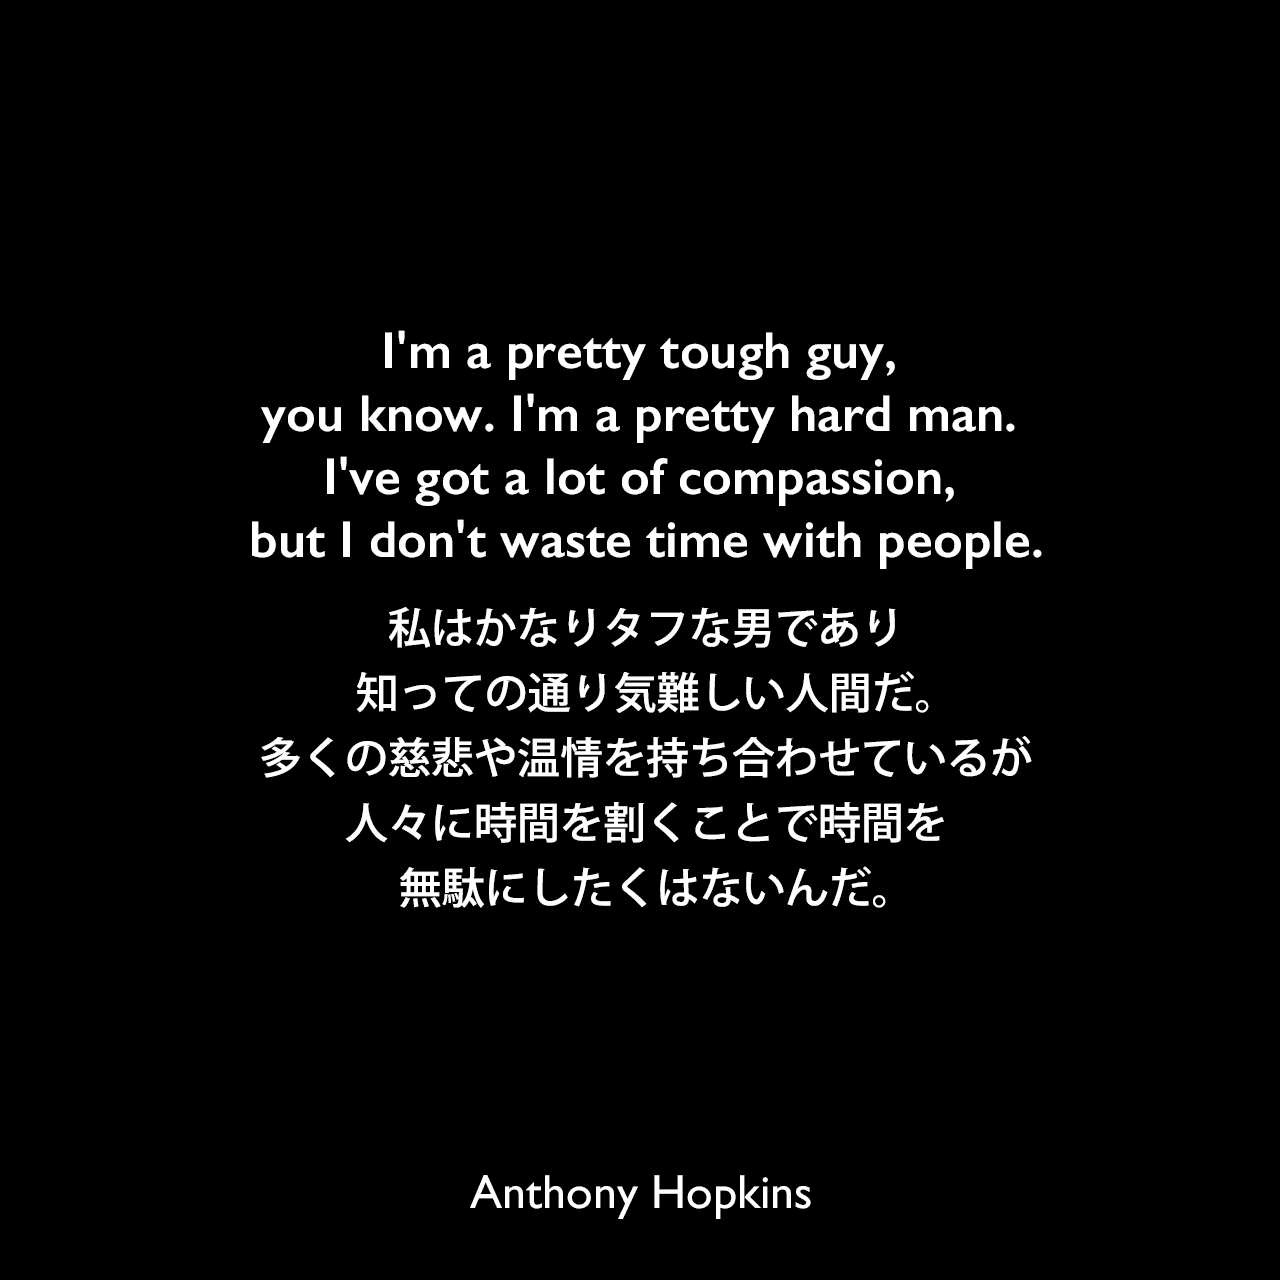 I'm a pretty tough guy, you know. I'm a pretty hard man. I've got a lot of compassion, but I don't waste time with people.私はかなりタフな男であり、知っての通り気難しい人間だ。多くの慈悲や温情を持ち合わせているが人々に時間を割くことで時間を無駄にしたくはないんだ。Anthony Hopkins